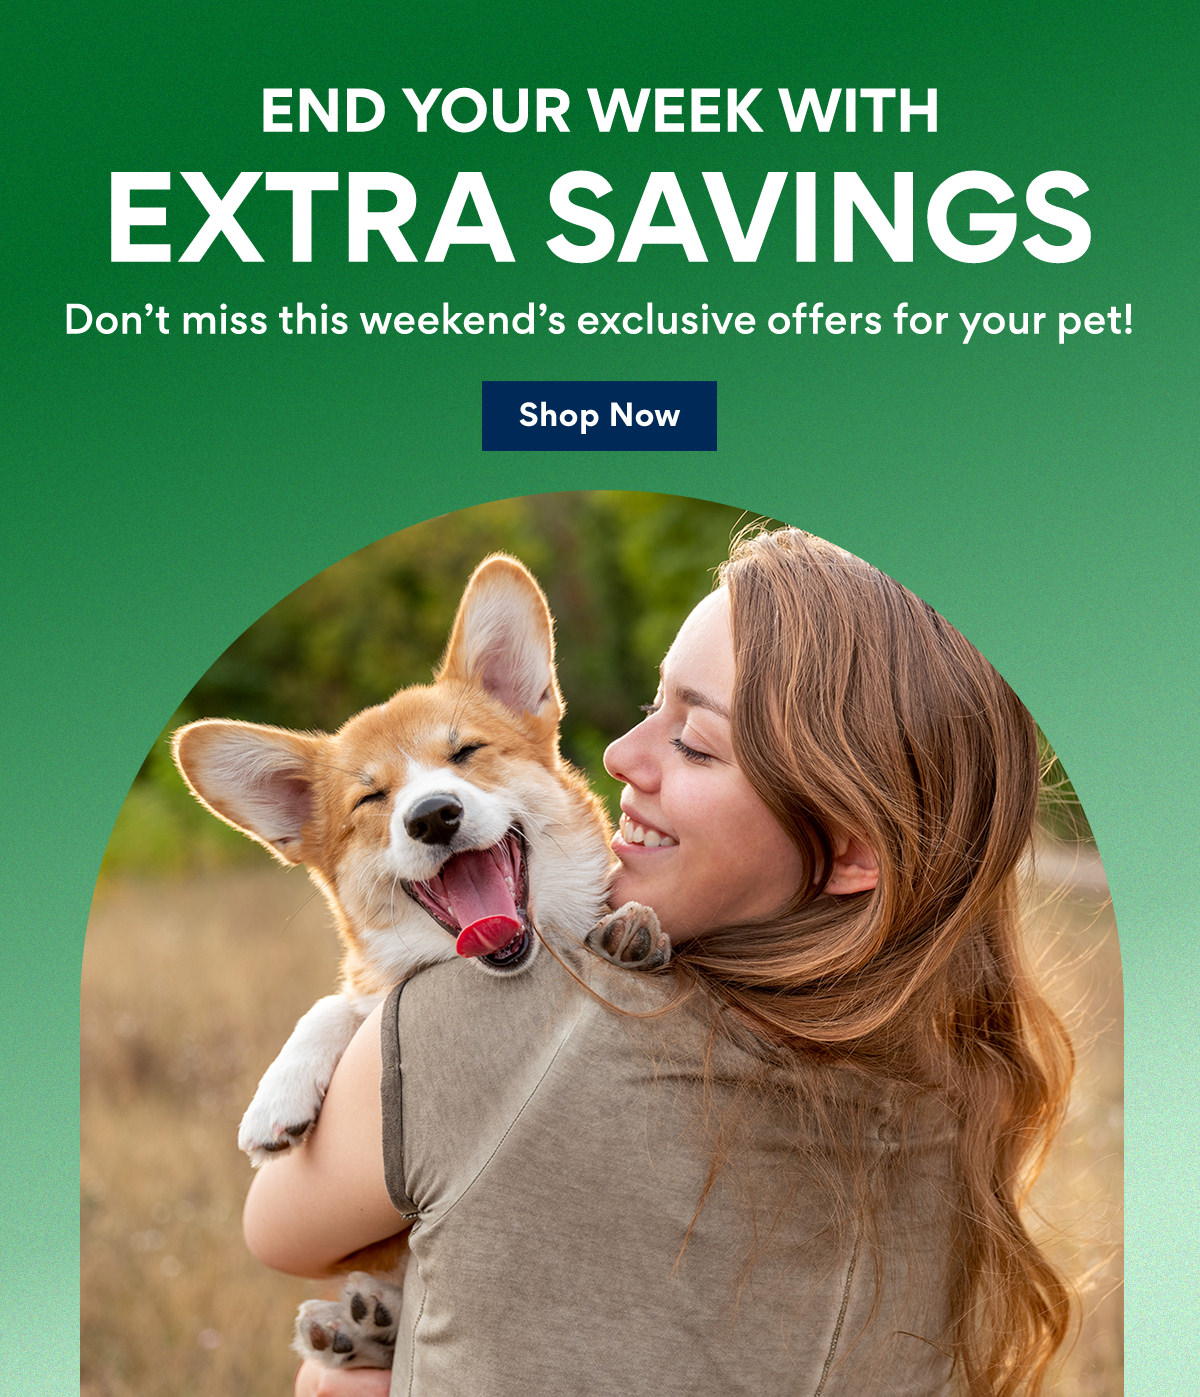 End Your Week With Extra Savings | Don't miss this weekend's exclusive offers for your pet! | Shop Now END YOUR WEEK WITH EXTRA SAVINGS Dont miss this weekends exclusive offers for your pet! Shop Now 